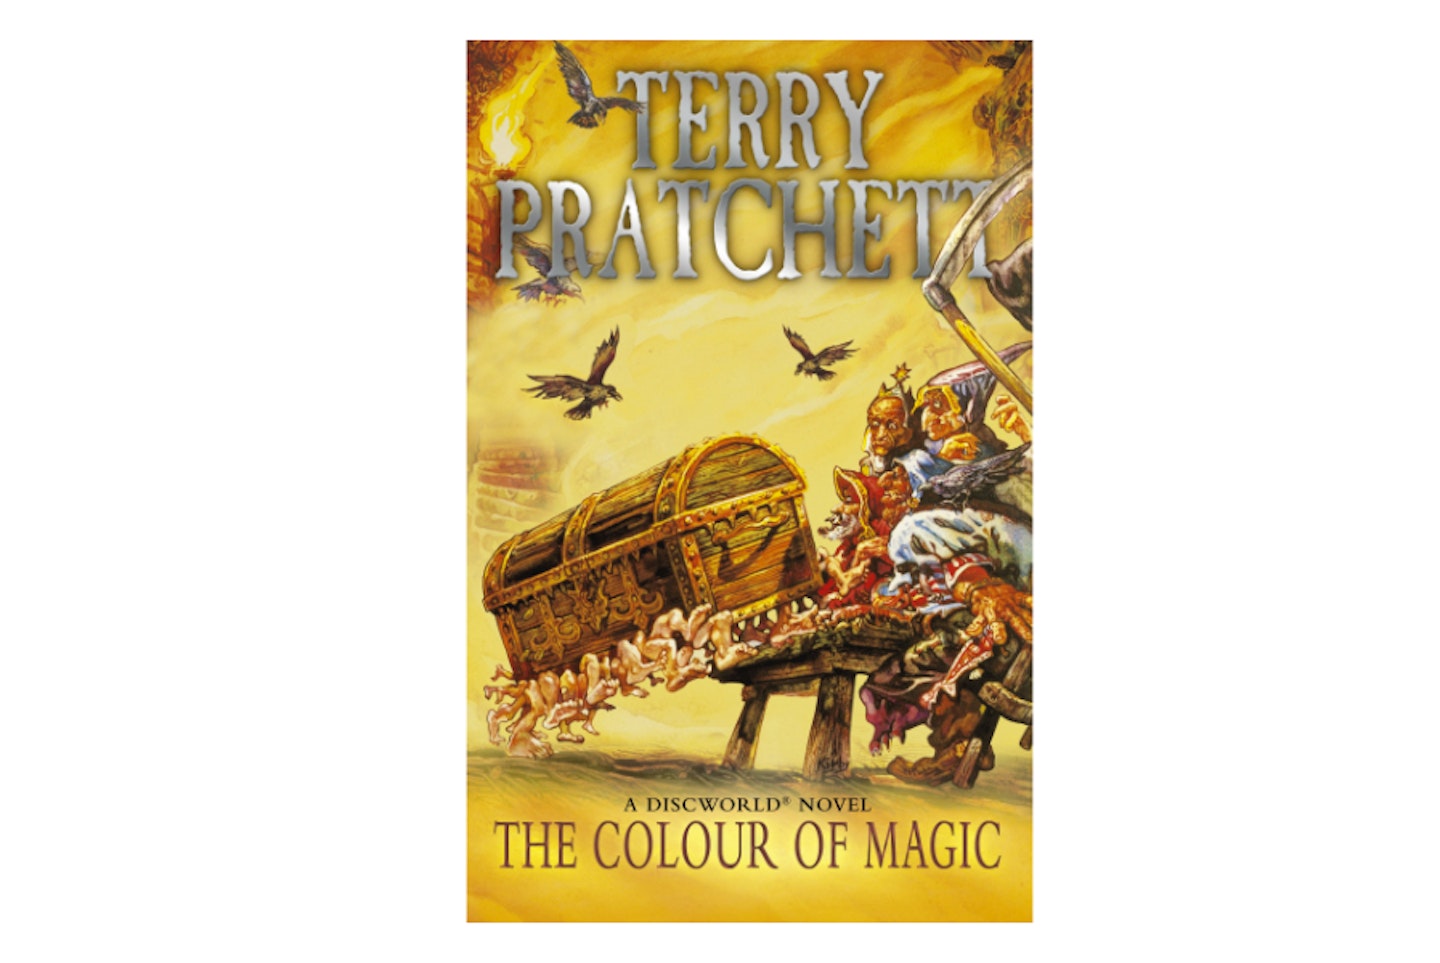 The Colour of Magic (A Discworld Novel: Book One) by Terry Pratchett